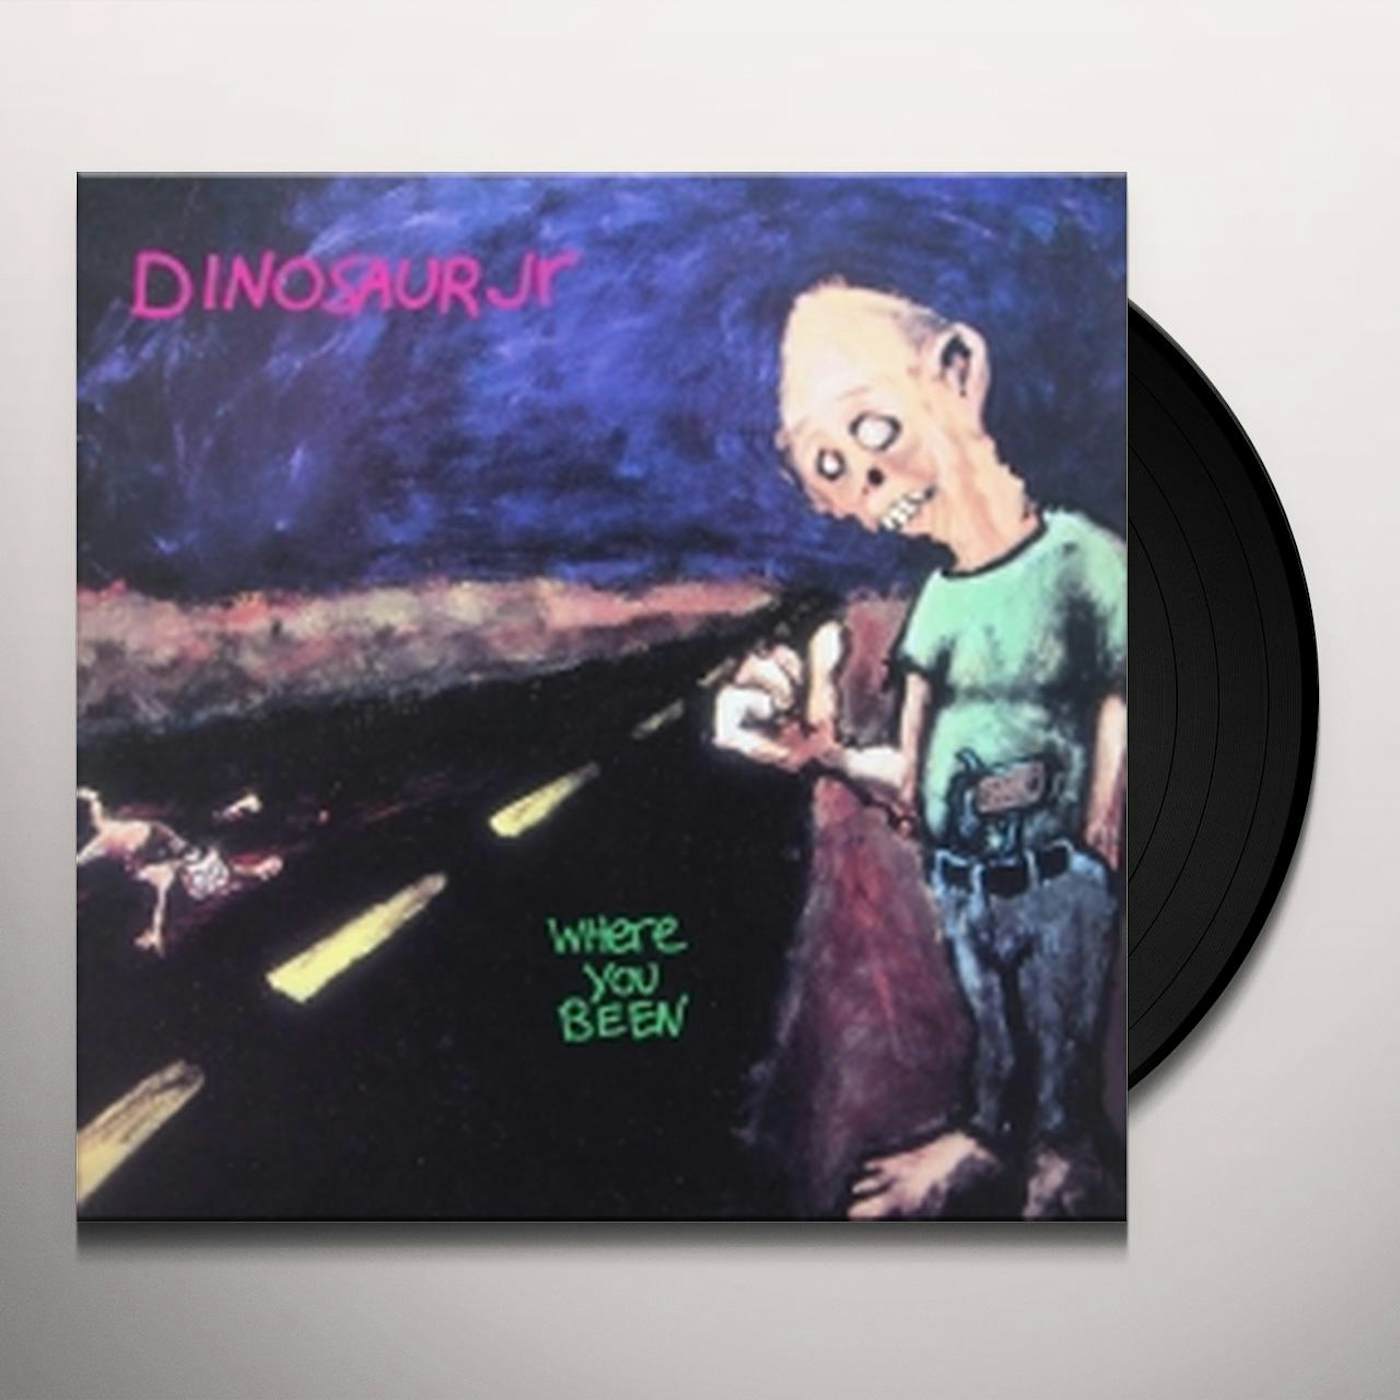 Dinosaur Jr. WHERE YOU BEEN (DELUXE EXPANDED EDITION/DOUBLE GATEFOLD/BLUE VINYL) Vinyl Record